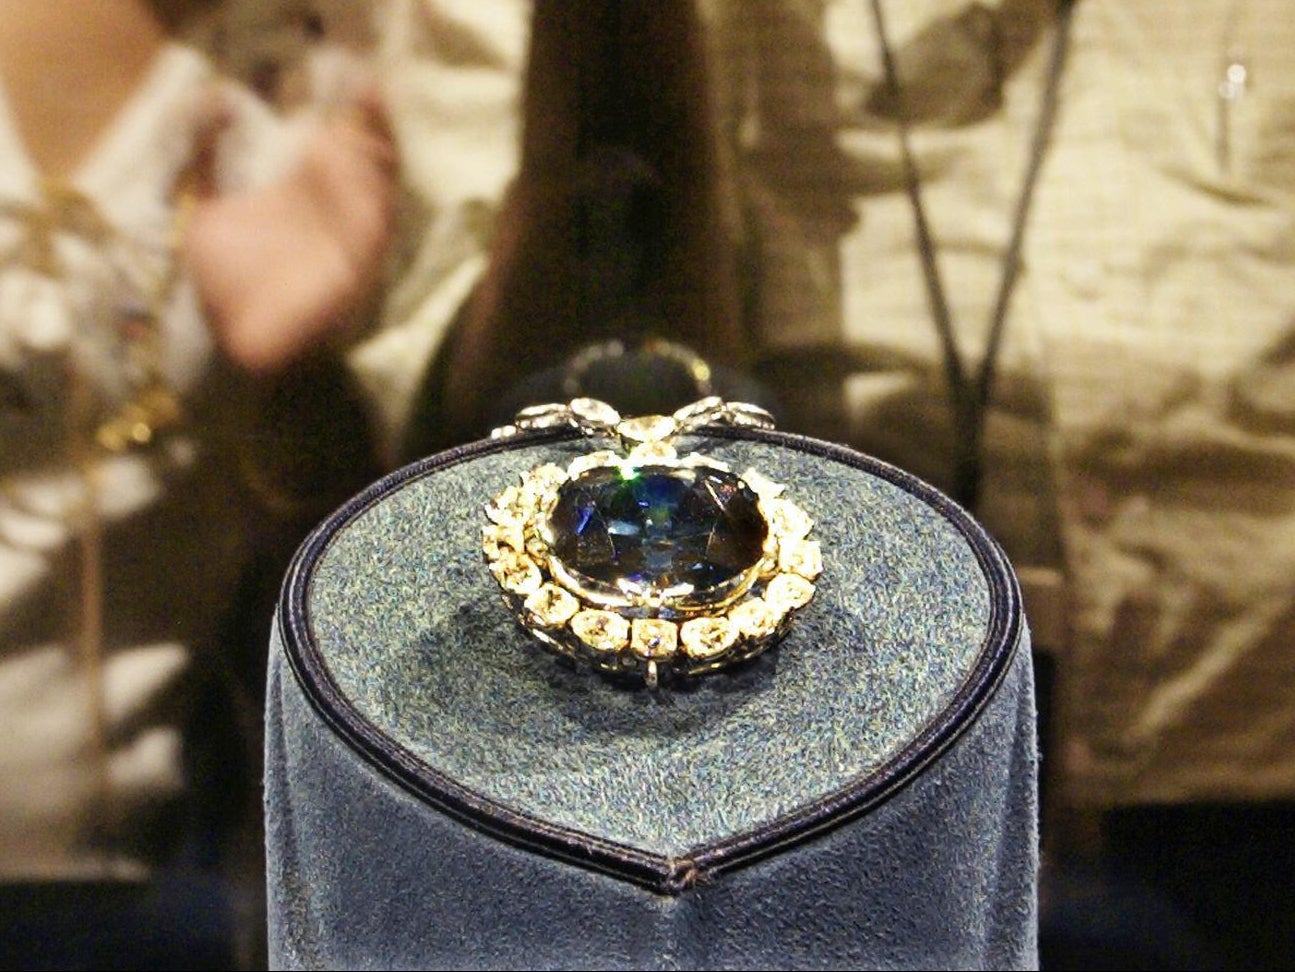 The Hope Diamond at the Smithsonian museum in Washington, DC